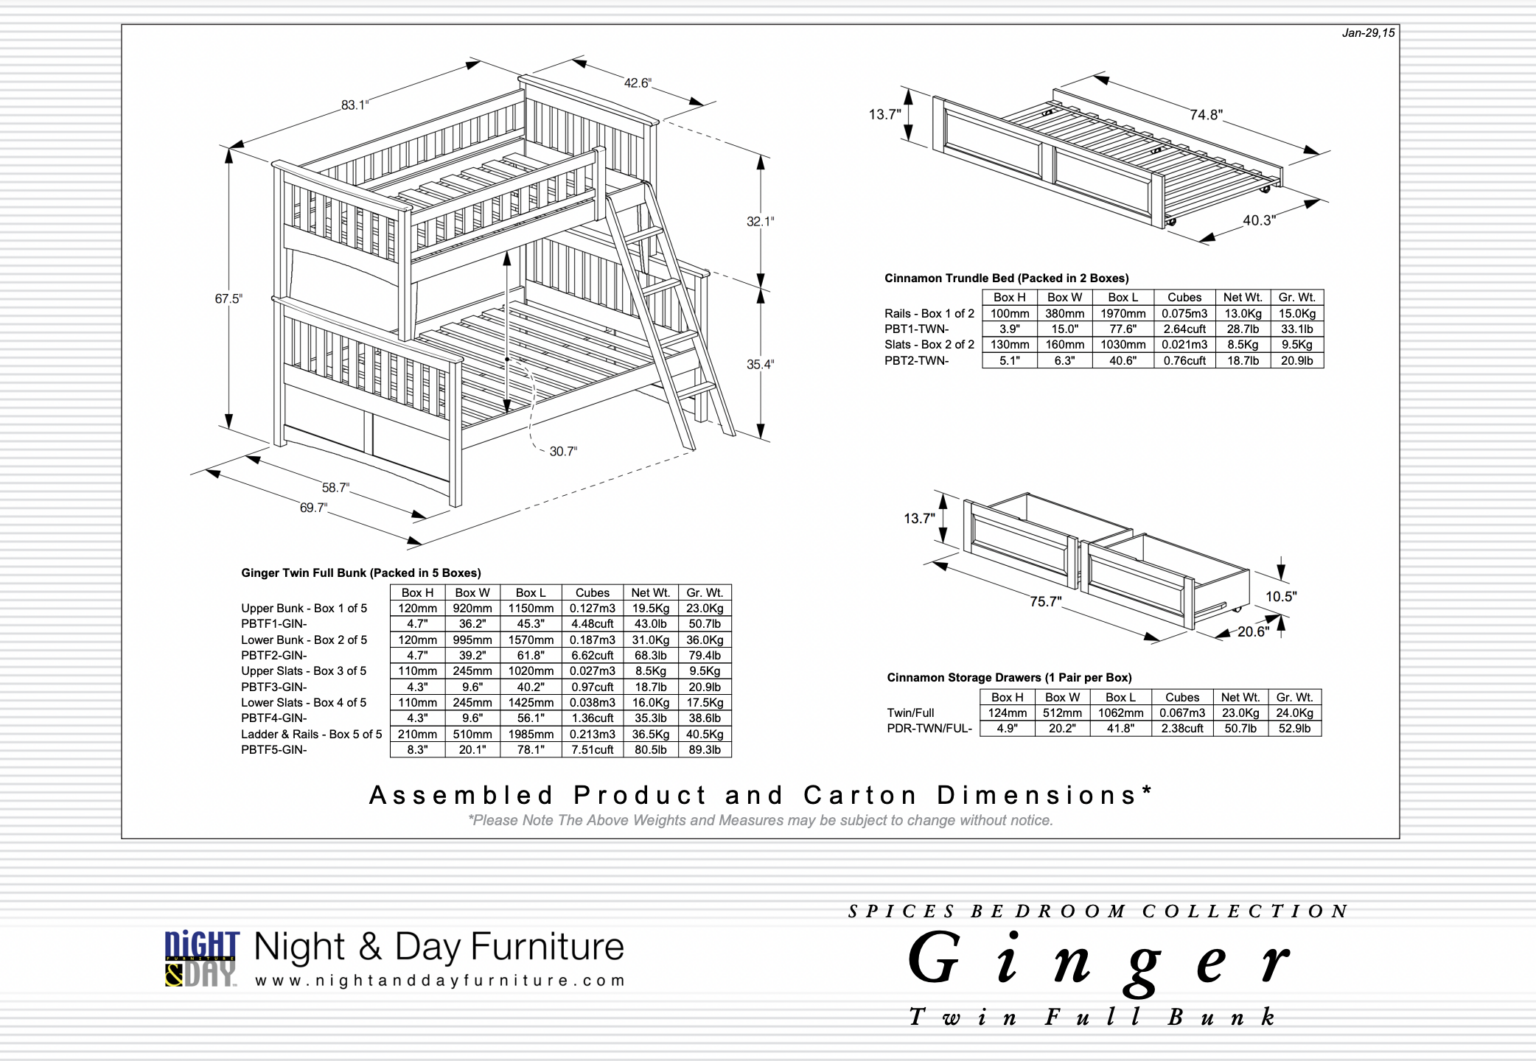 Twin-Full Ginger Bunk Bed Dimensions